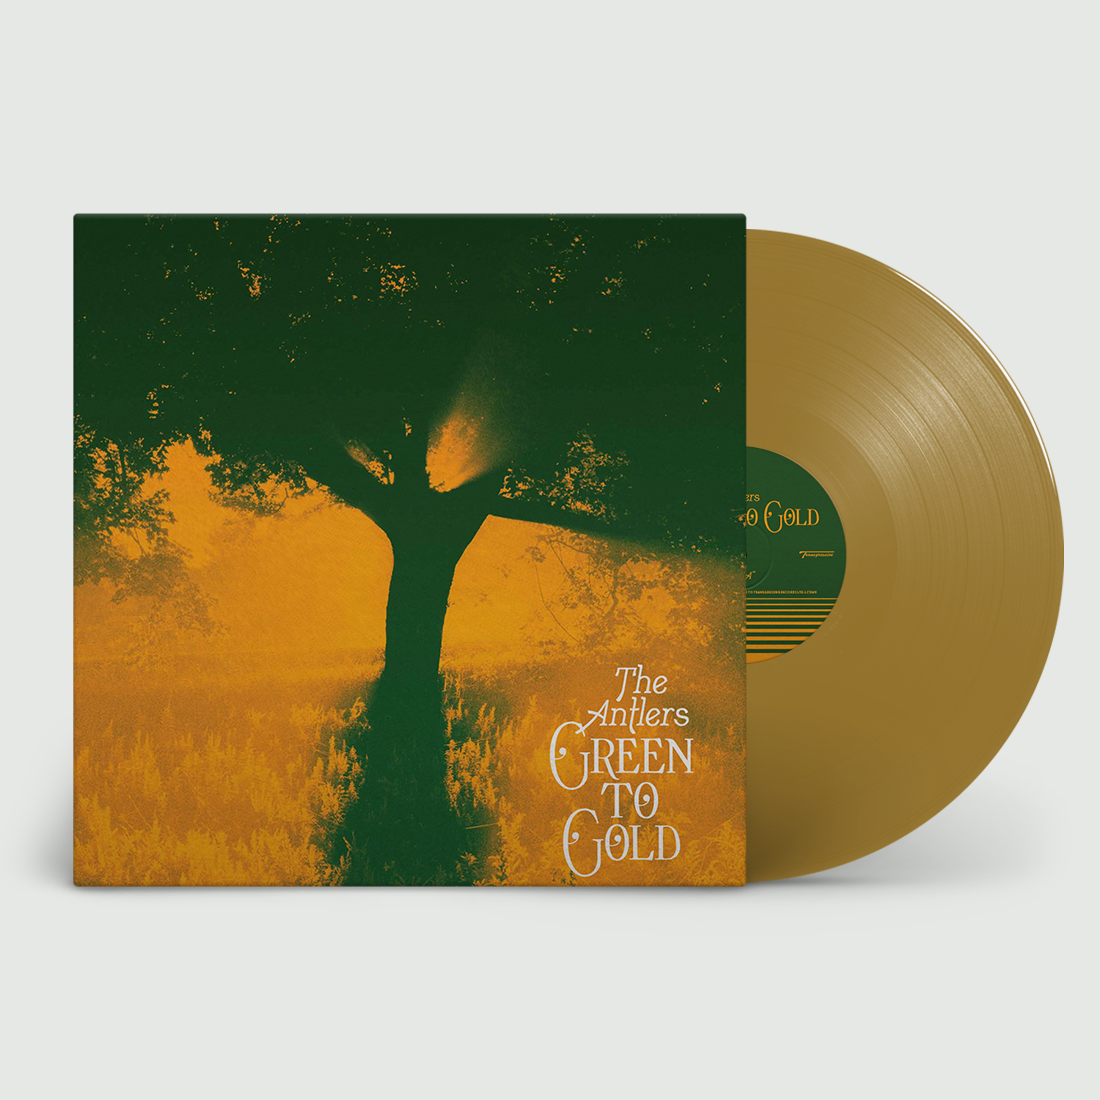 The Antlers - Green To Gold: Limited Gold Vinyl LP